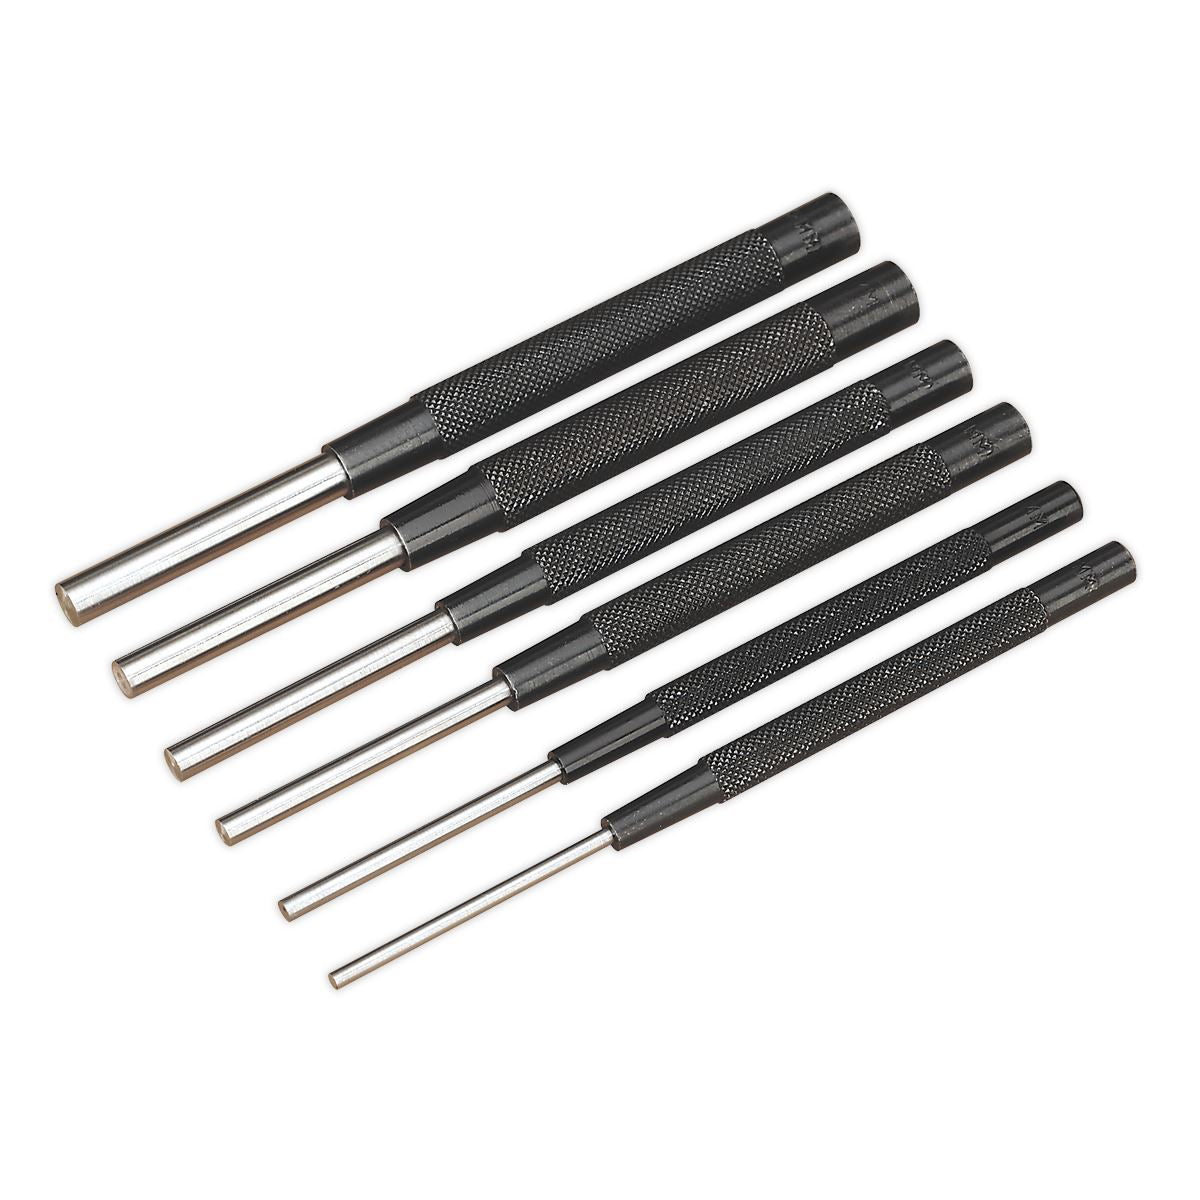 Sealey Parallel Pin Punch Set 6pc